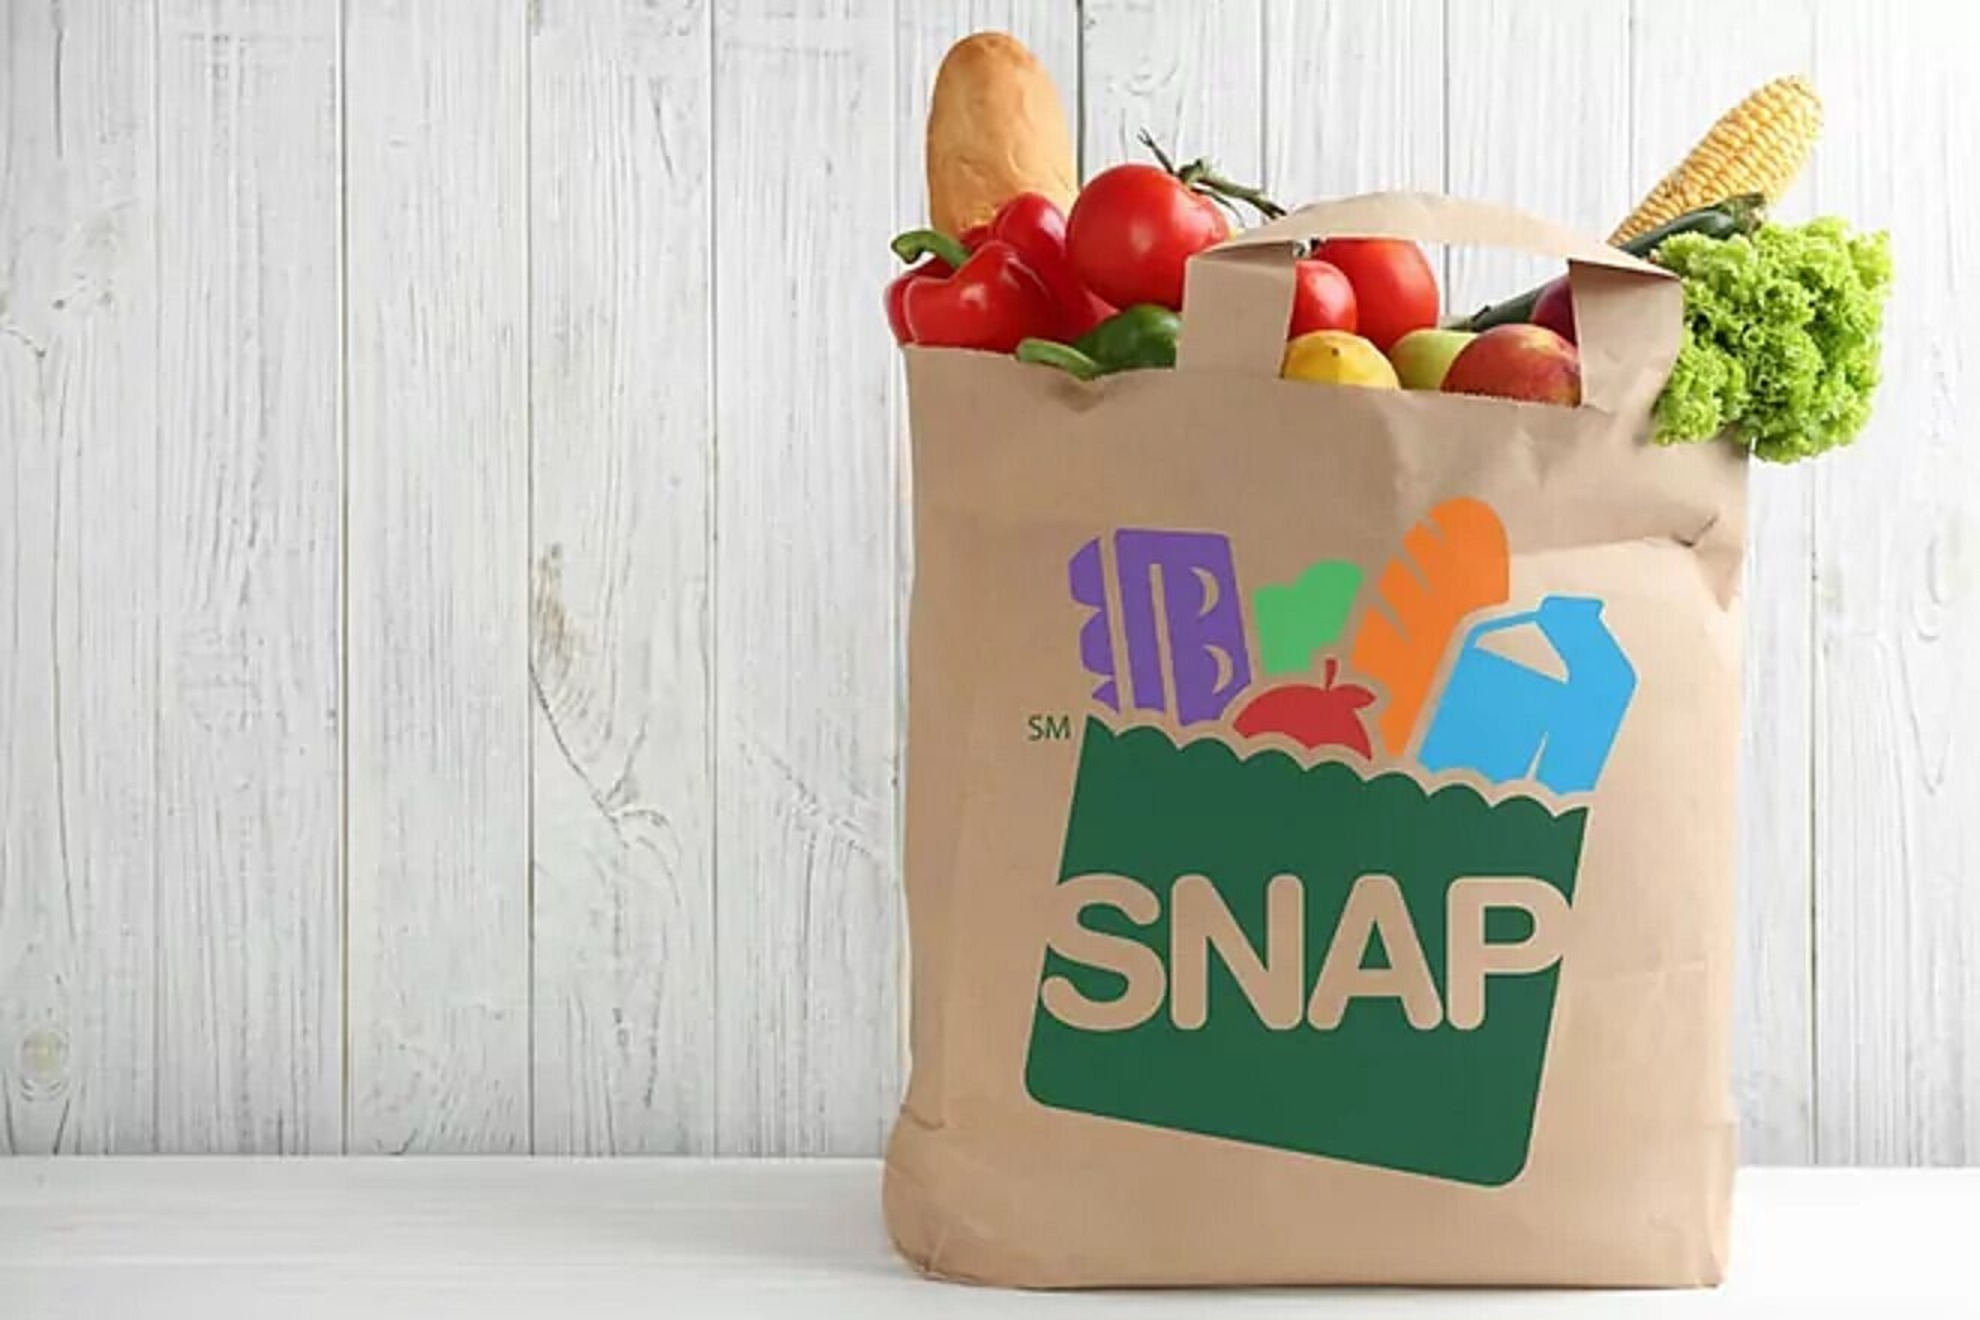 Who will receive their food stamps this week?